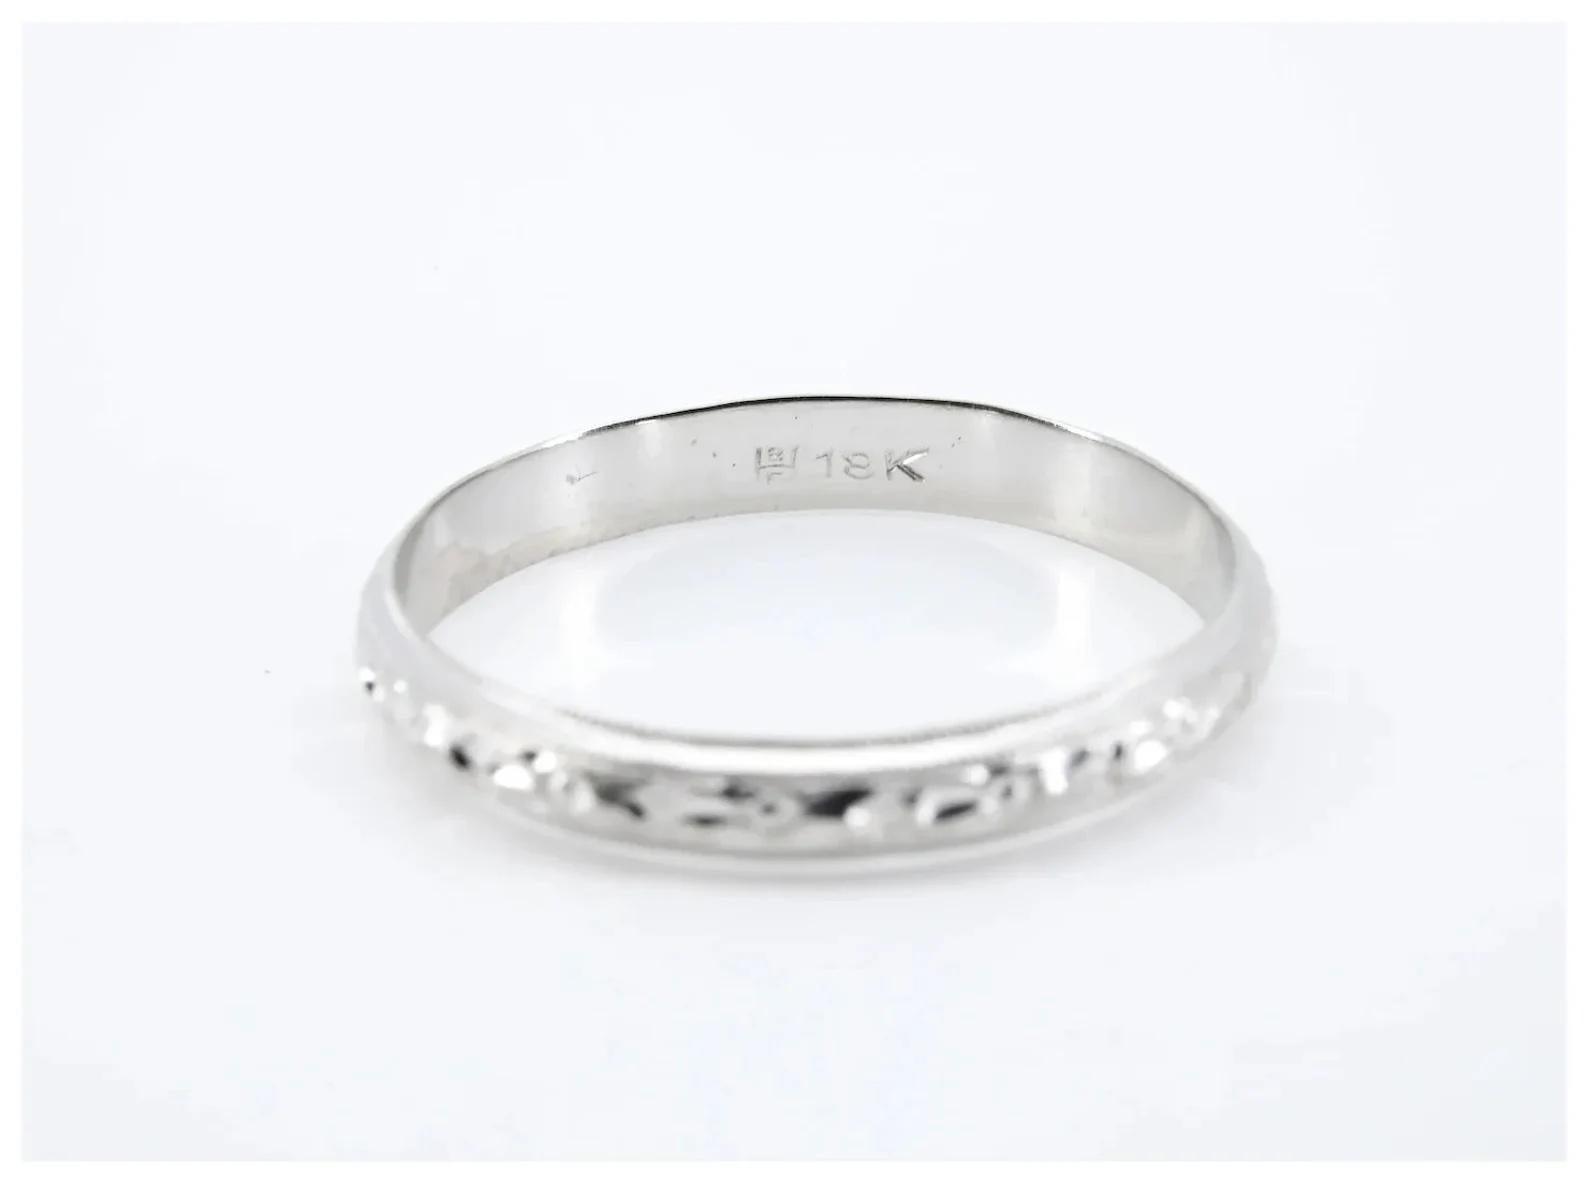 Art Deco Orange Blossom Pattern Wedding Band in 18K White Gold Size 10 In Good Condition For Sale In Boston, MA